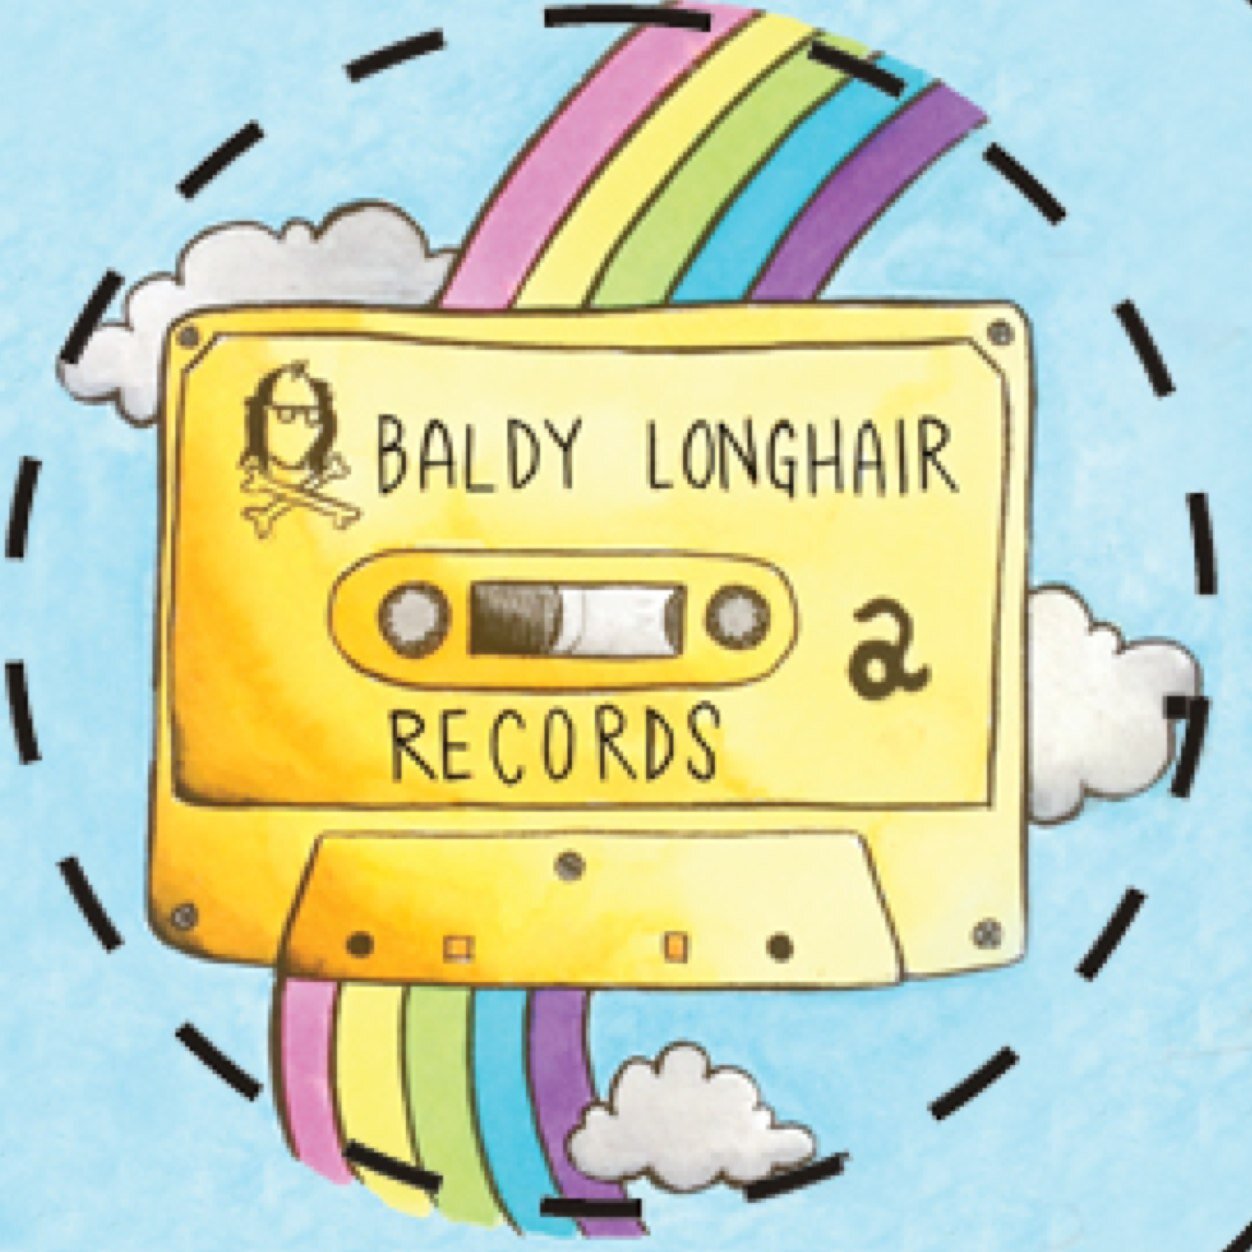 Baldy Longhair Records is an analog lovin' punk rock label out of NJ.